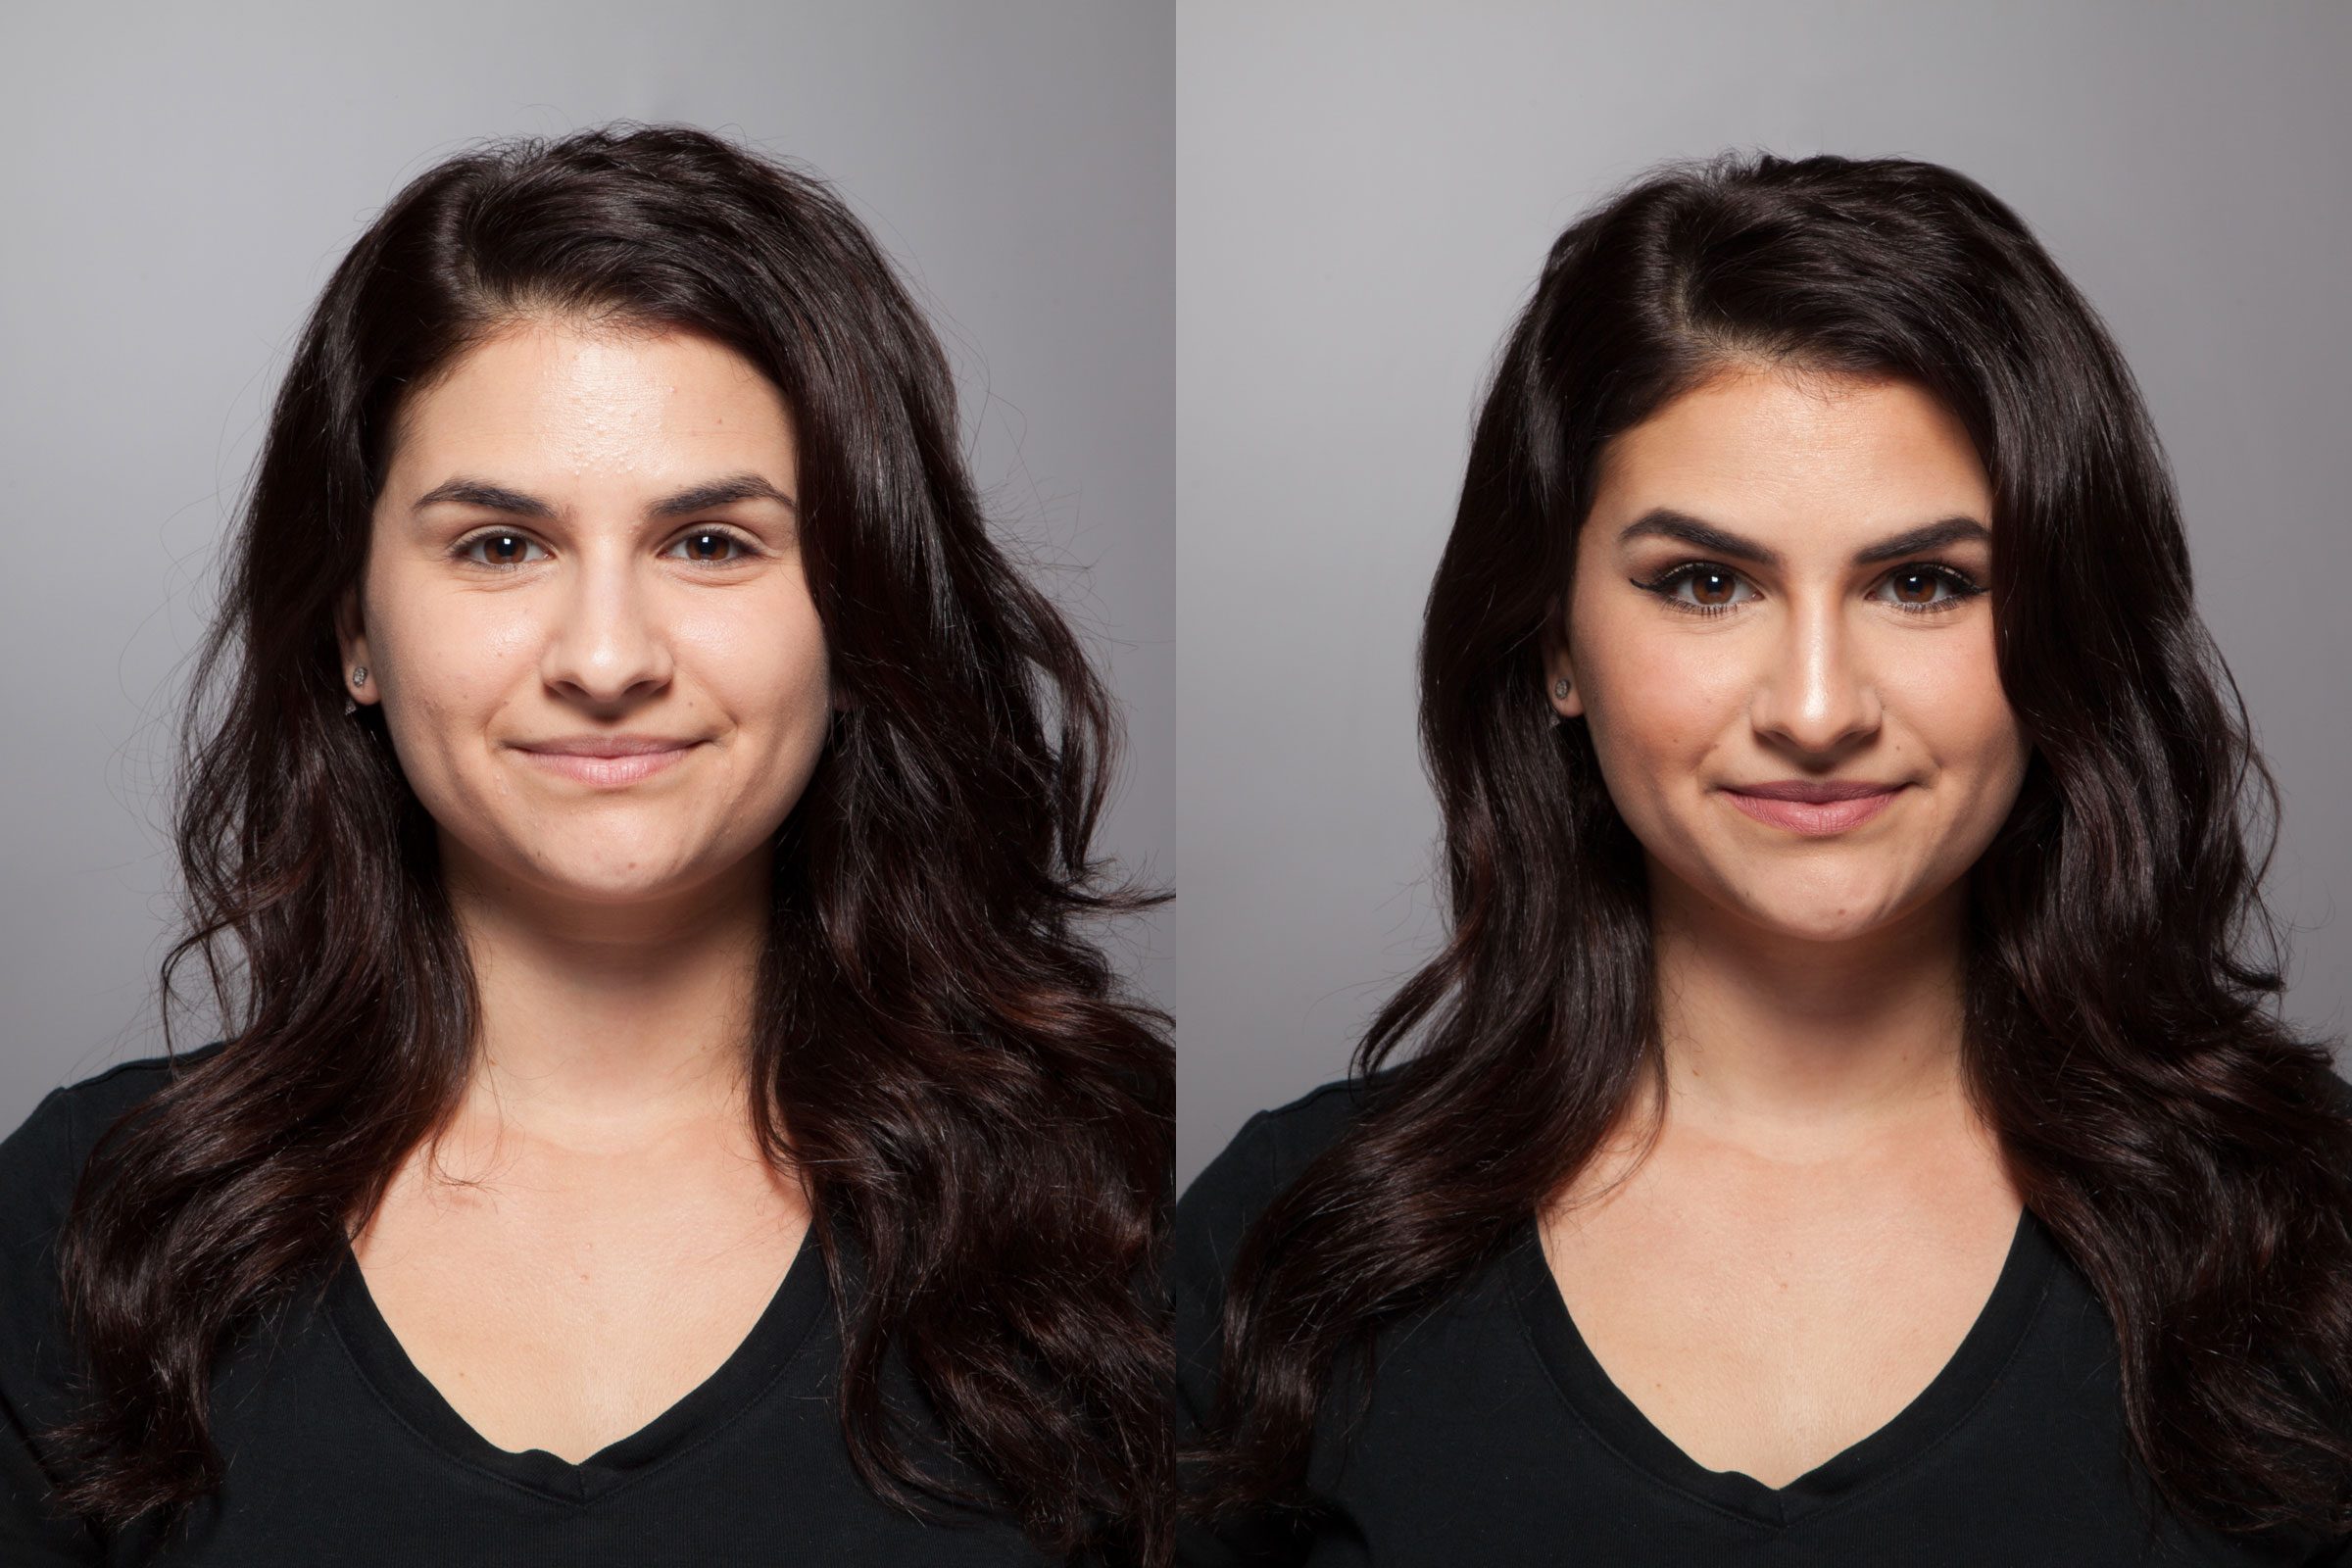 Make Your Face Look Slimmer With Makeup Tricks